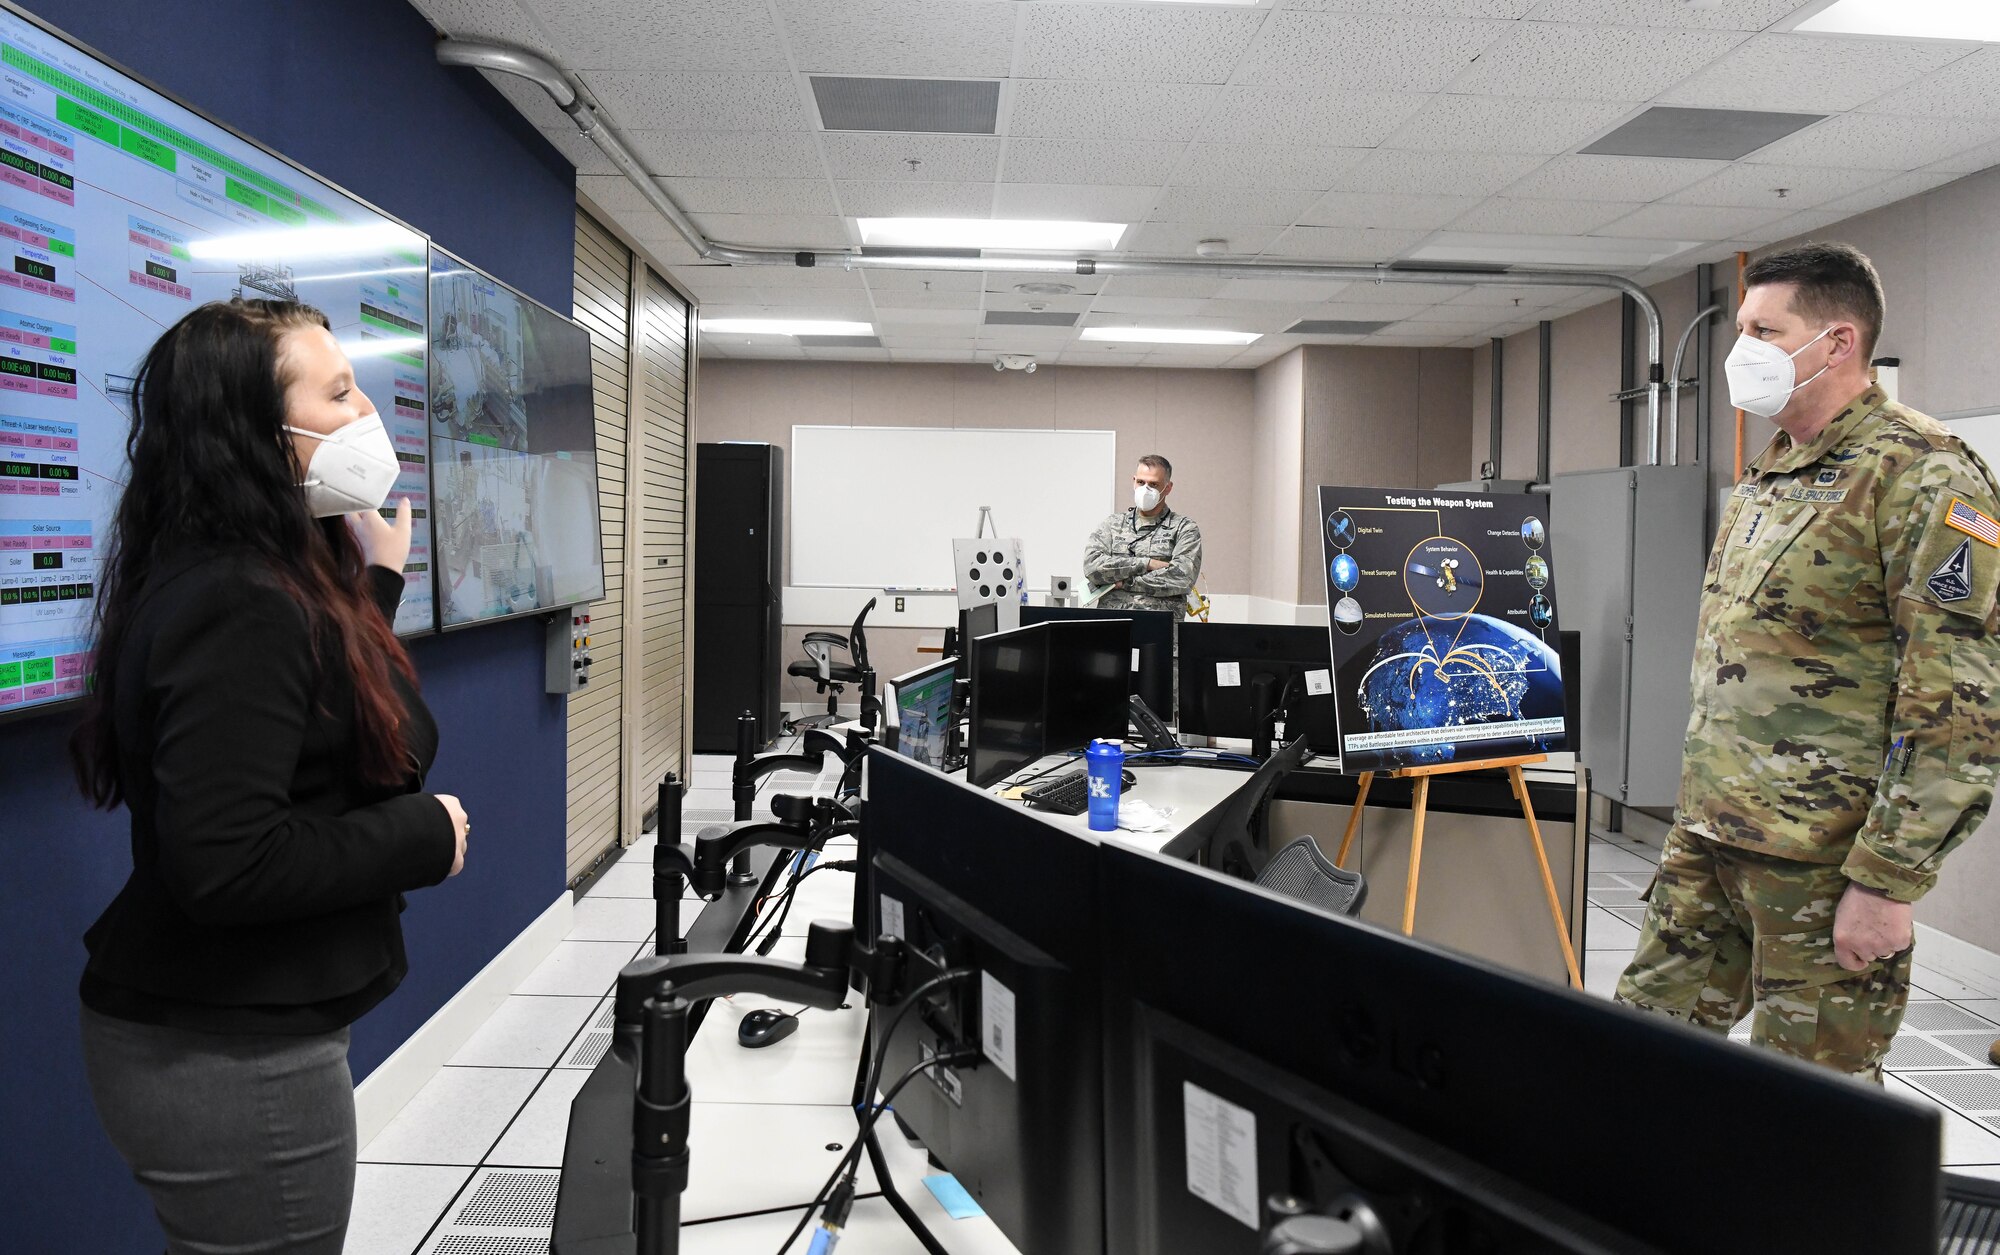 Kellye Burns, space test engineer, left, speaks about the Arnold Engineering Development Complex Space Asset Resilience capability to Gen. David Thompson, vice chief of space operations, U.S. Space Force, during a tour of the Space Threat Assessment Testbed control room at Arnold Air Force Base, Tenn., headquarters of AEDC, Feb. 5, 2021. (U.S. Air Force photo by Jill Pickett)